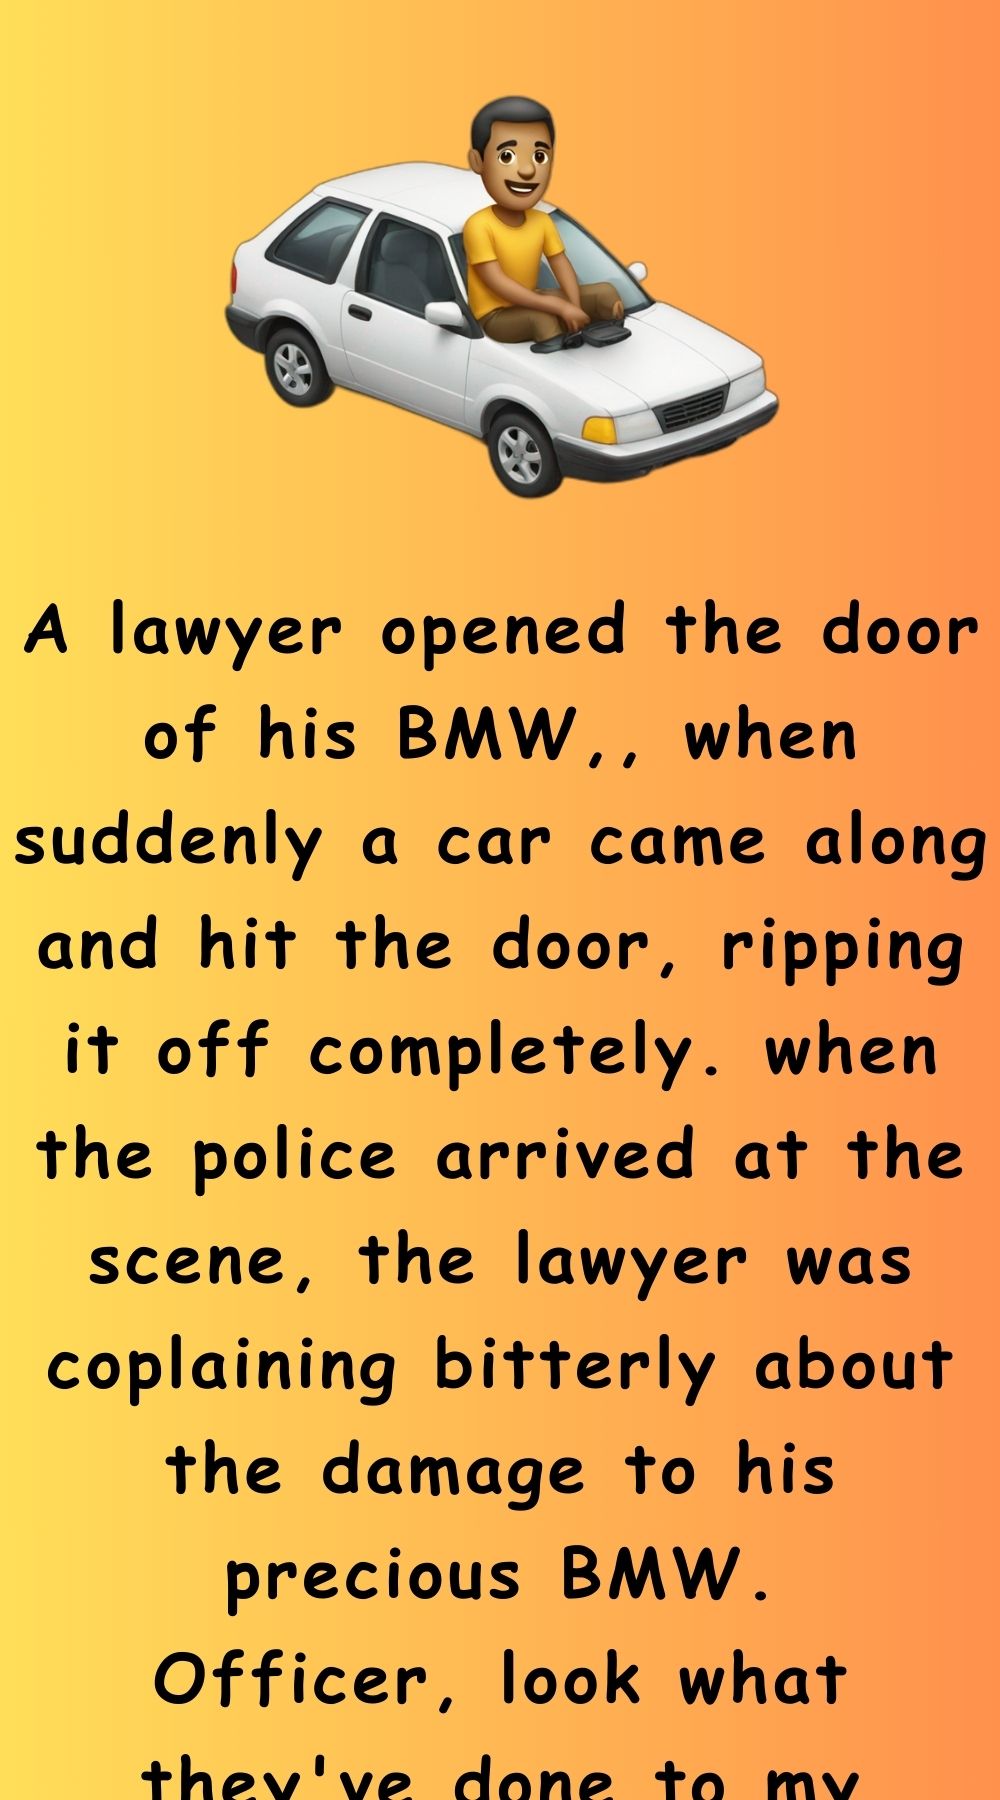 A lawyer opened the door of his BMW